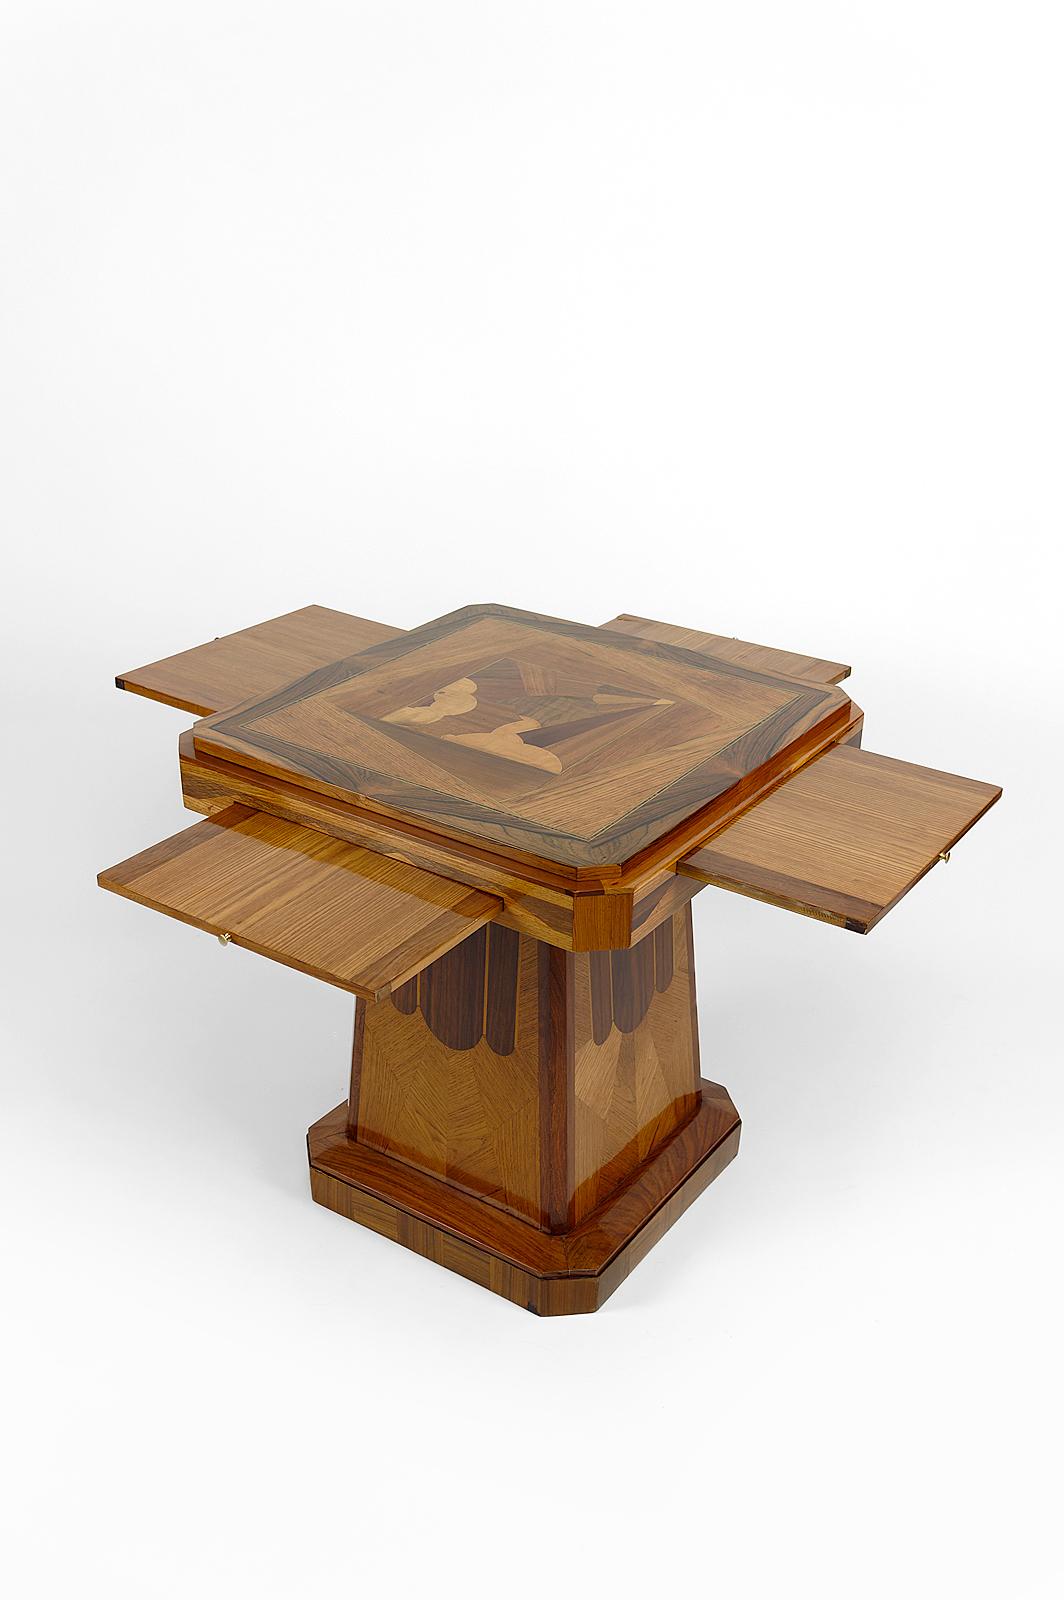 Superb pedestal / game / side table in inlaid wood with geometric patterns.

The tray contains 4 removable shelves using a small brass handle.

Very good quality, beautiful marquetry.

Art Deco, France, circa 1925-1930.

In excellent